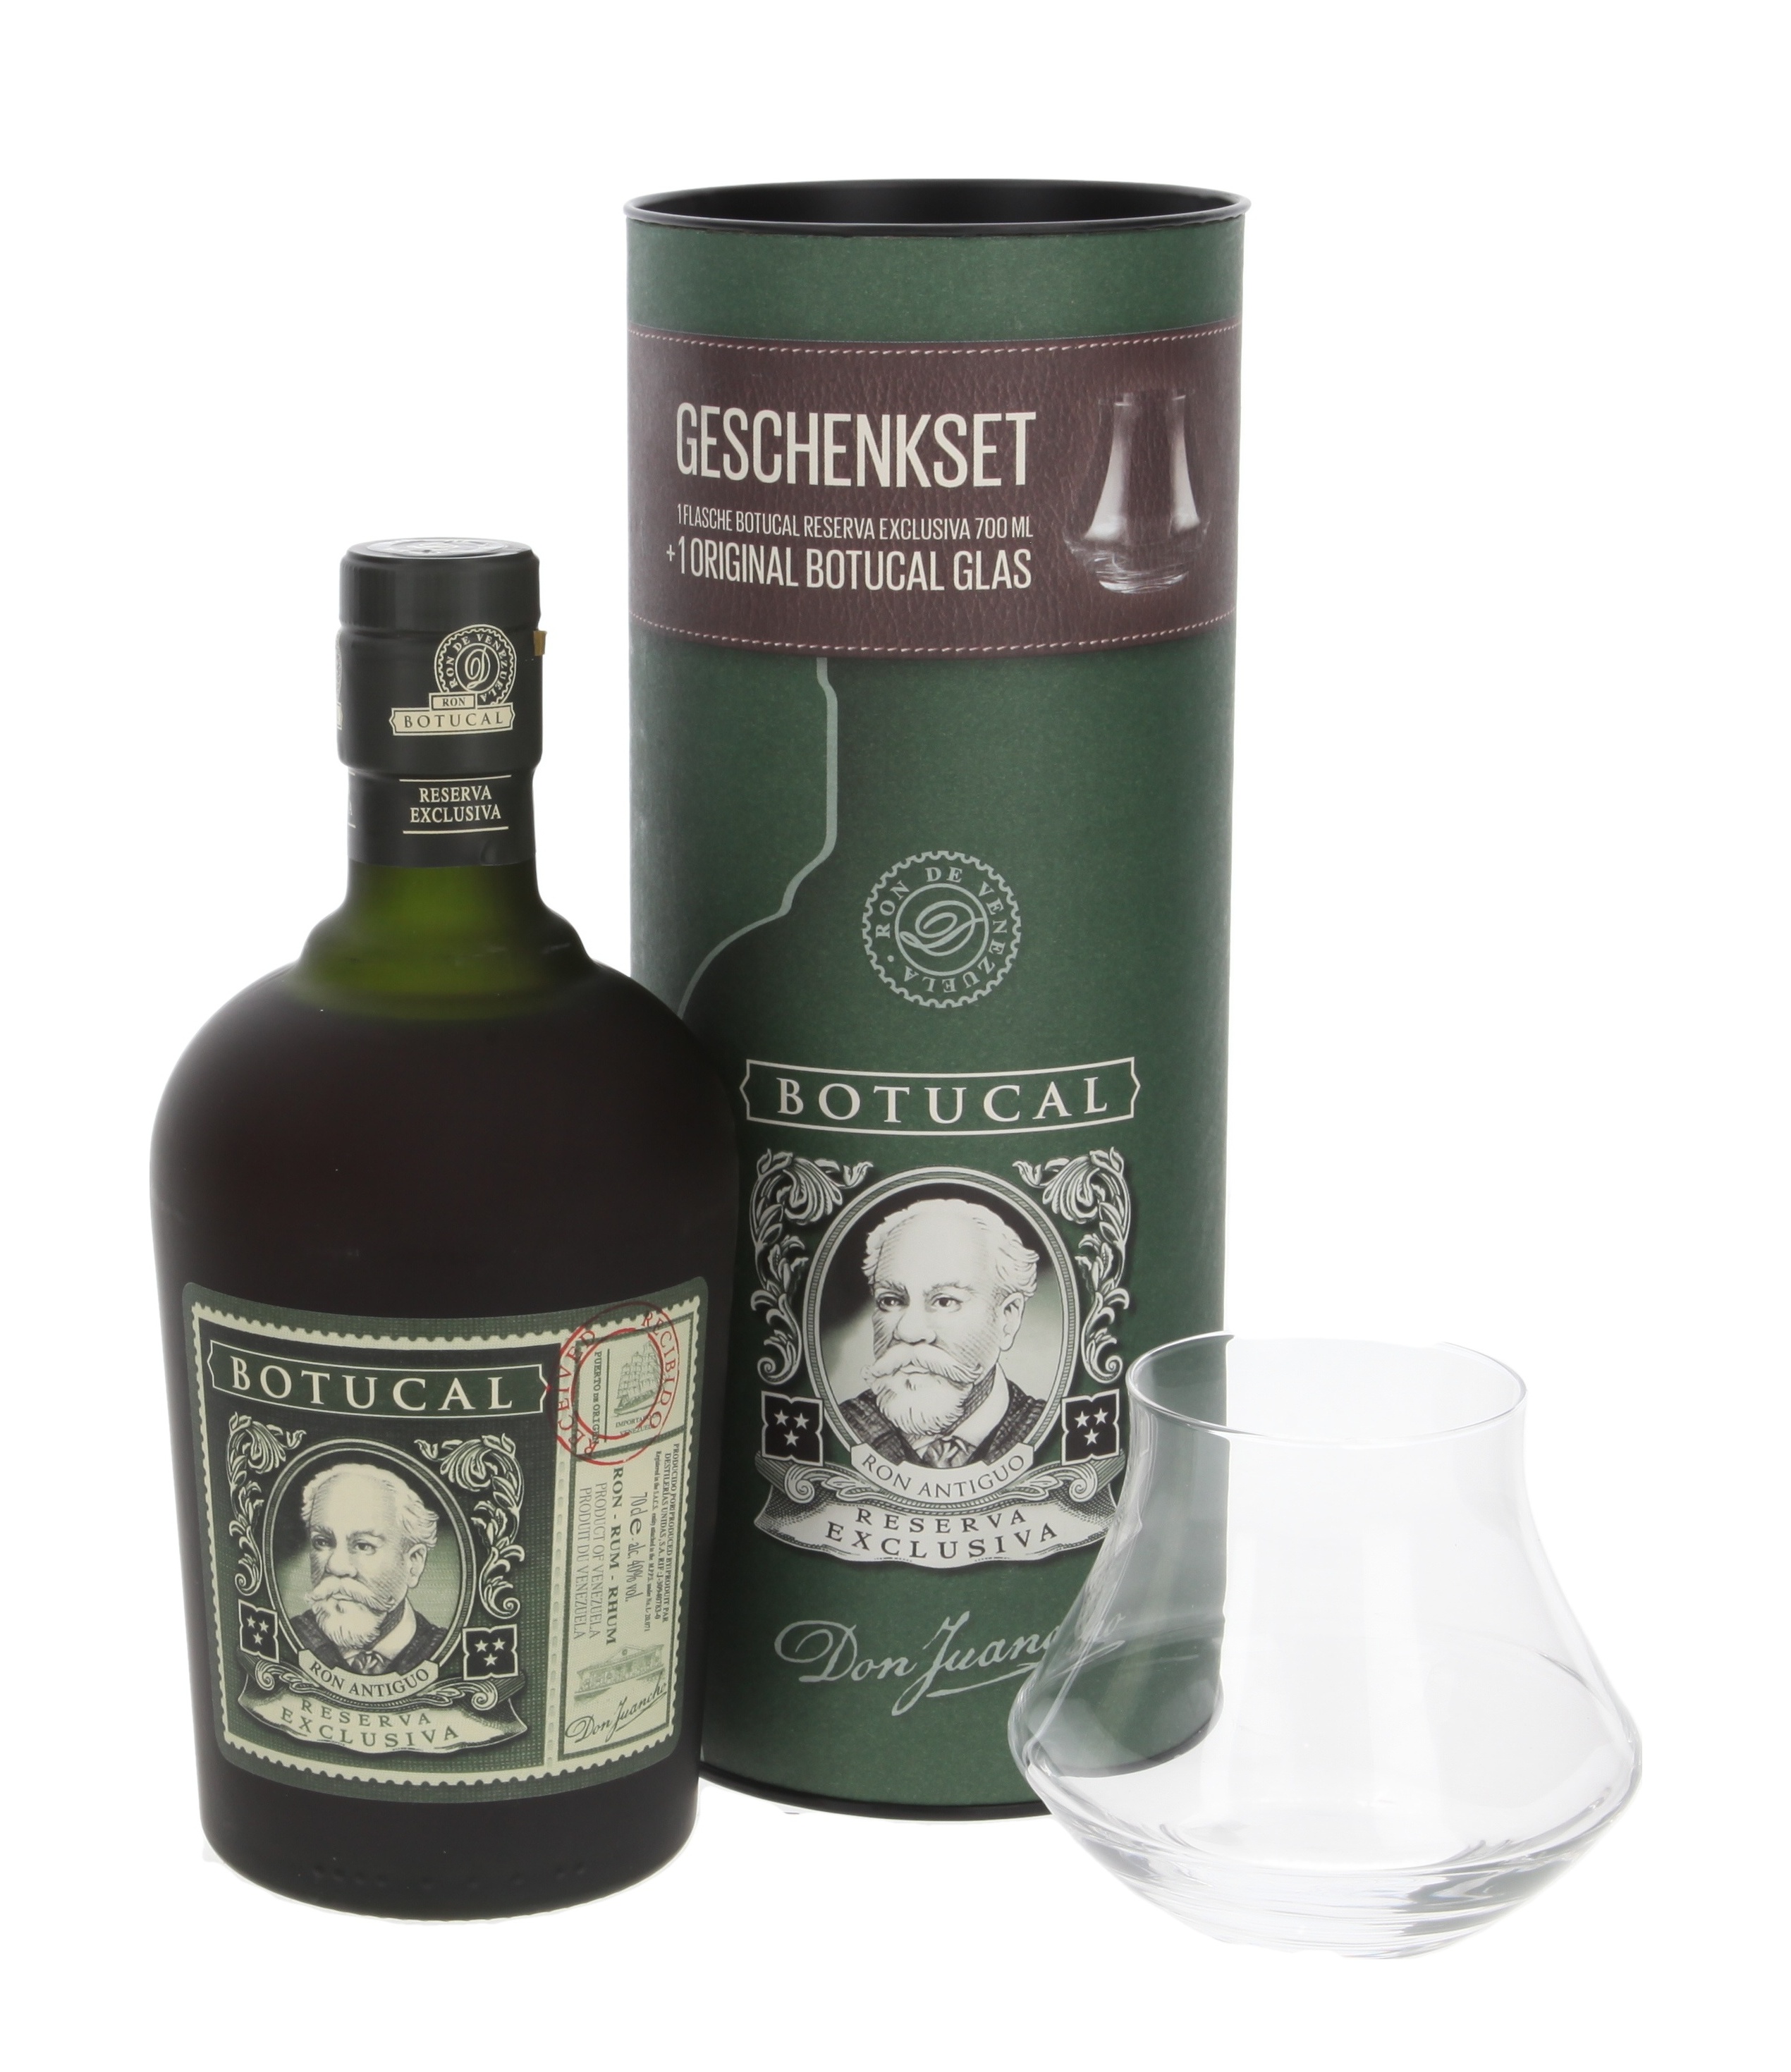 store Reserva online with | glass the To » 1 Whisky.de Exclusiva Botucal Rum